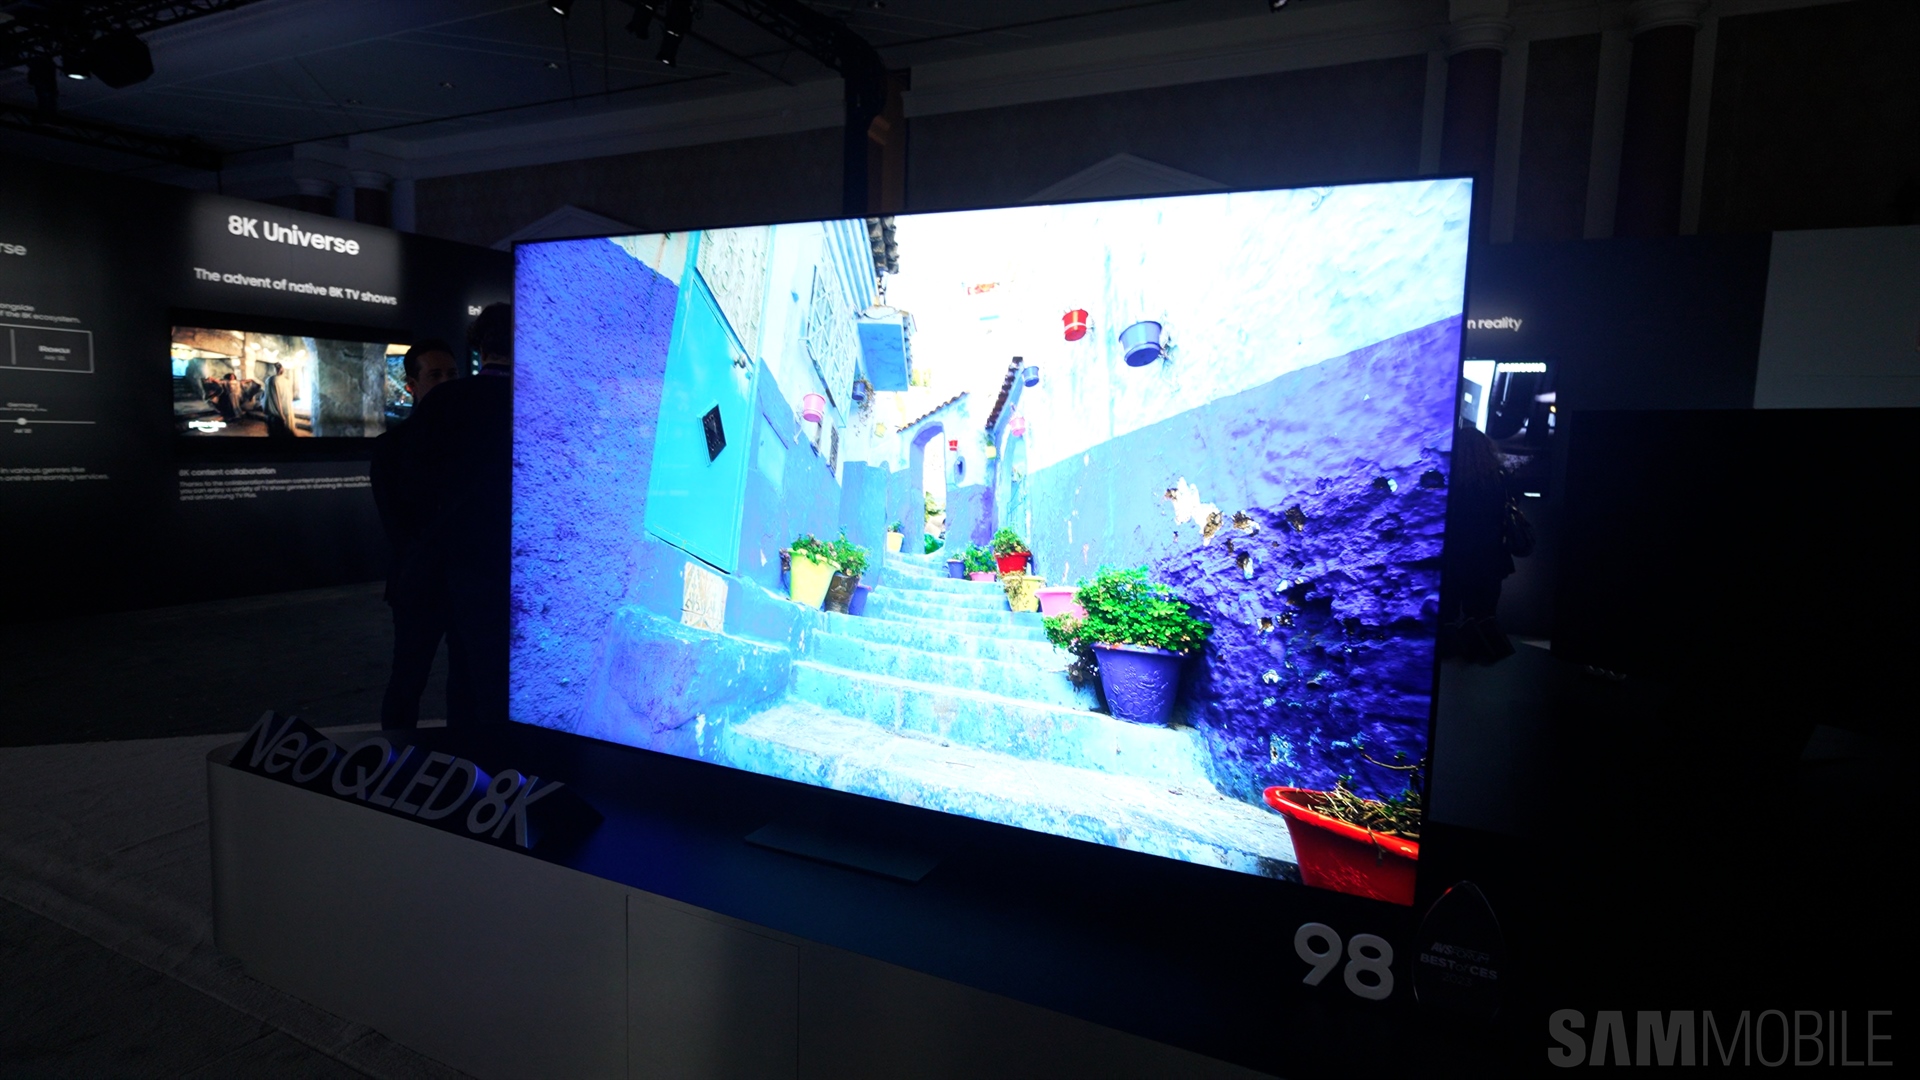 Samsung just announced a 98-inch 8K TV because why not